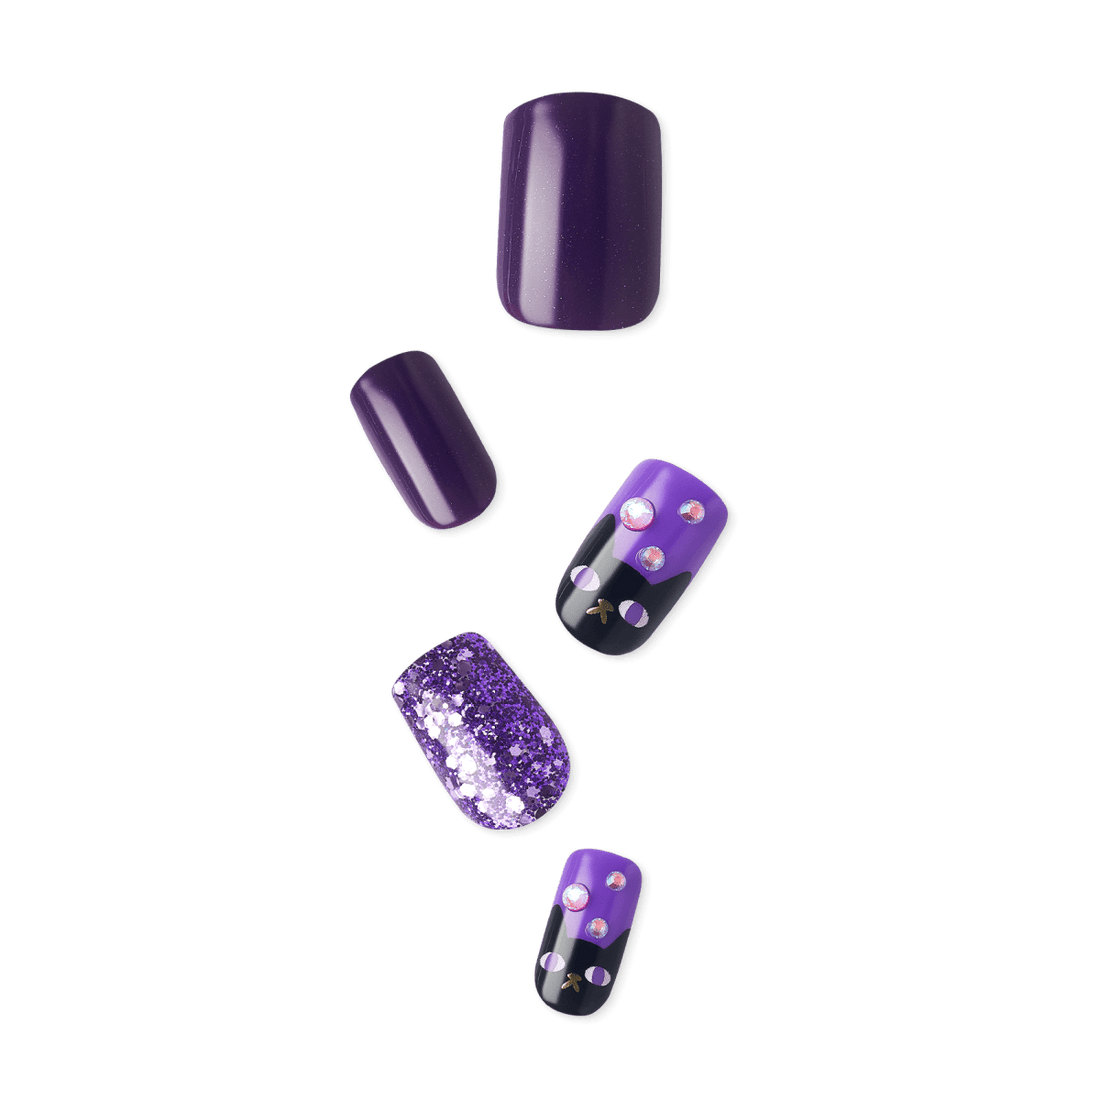 KISS imPRESS No Glue Mani Press On Nails, Design, Too cute to spook, Purple, Med Squoval, 30ct